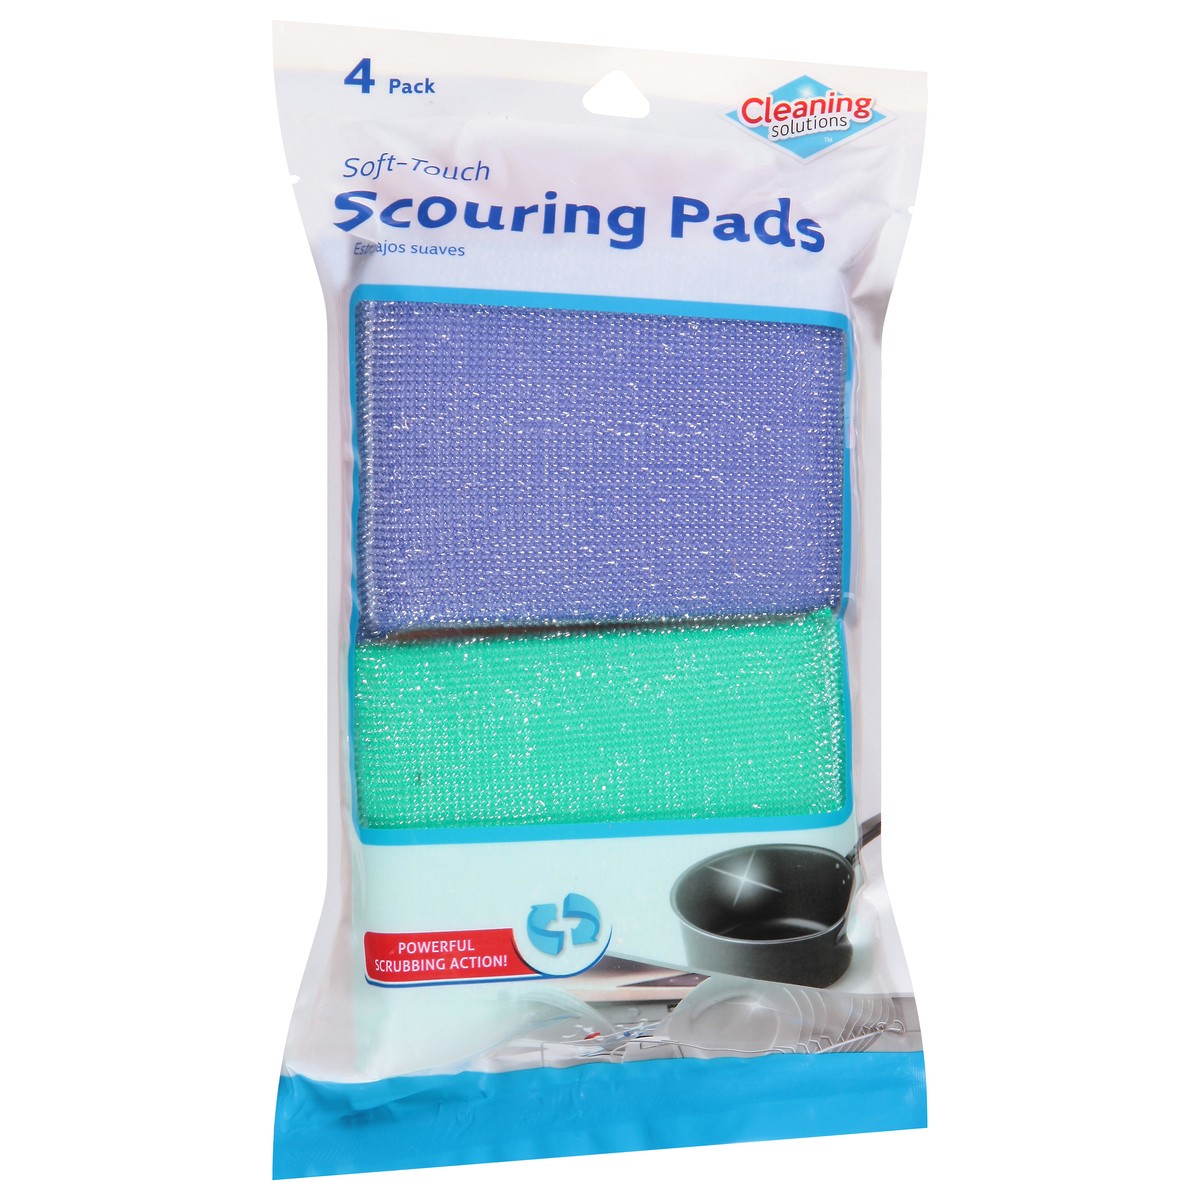 slide 6 of 12, Jacent 4 Pack Soft-Touch Scouring Pads 4 ea, 4 ct